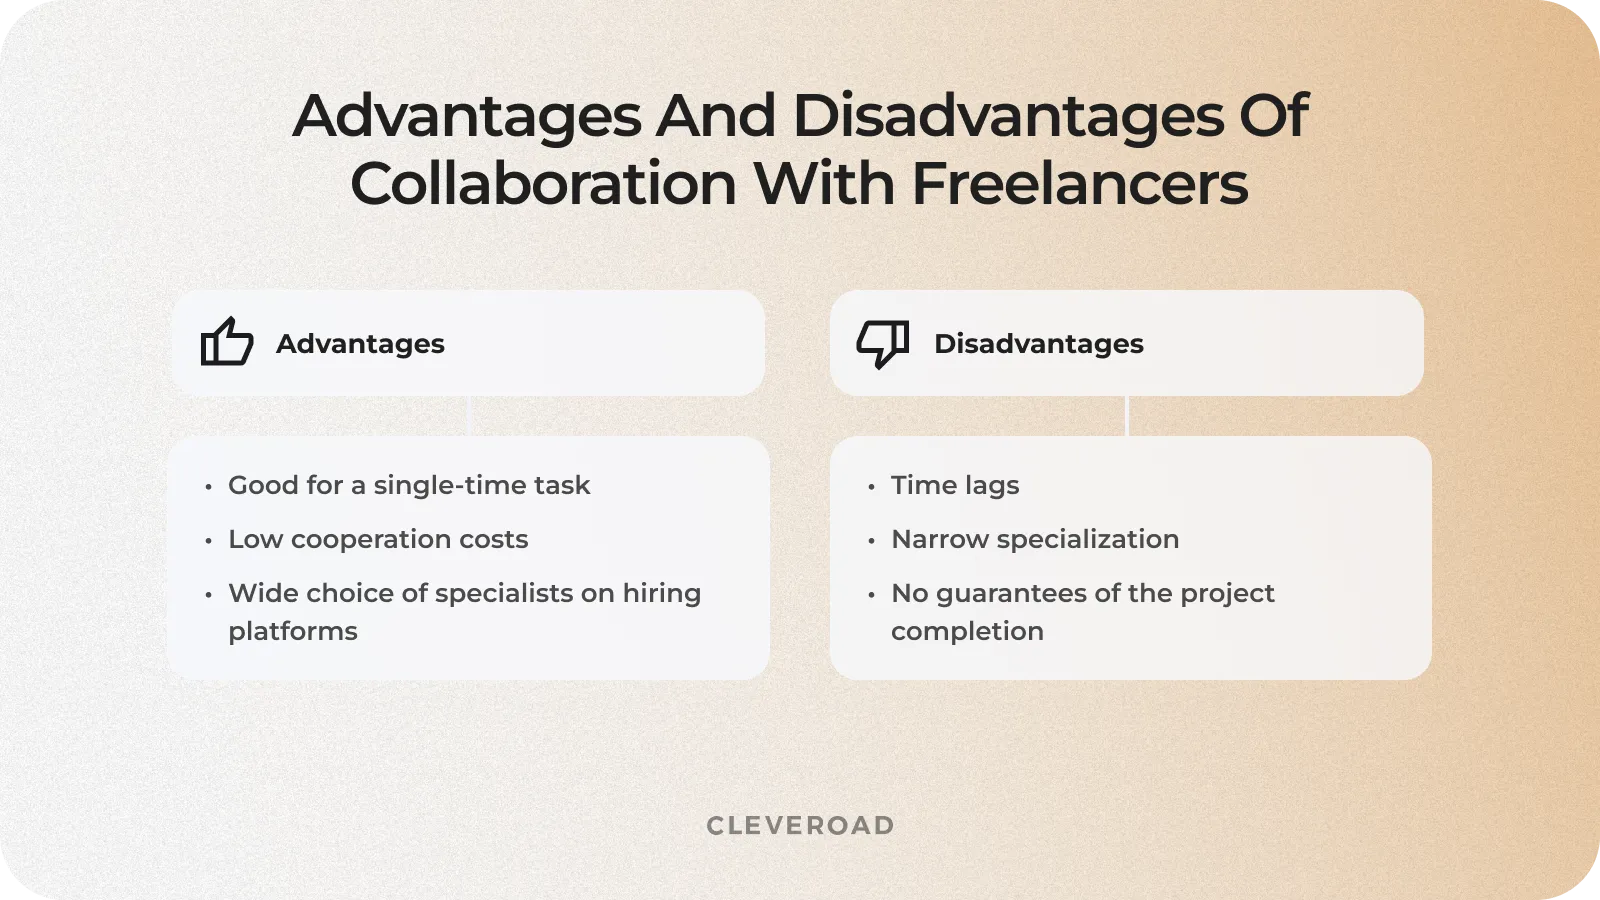 Advantages and disadvantages of collaborating with freelancers